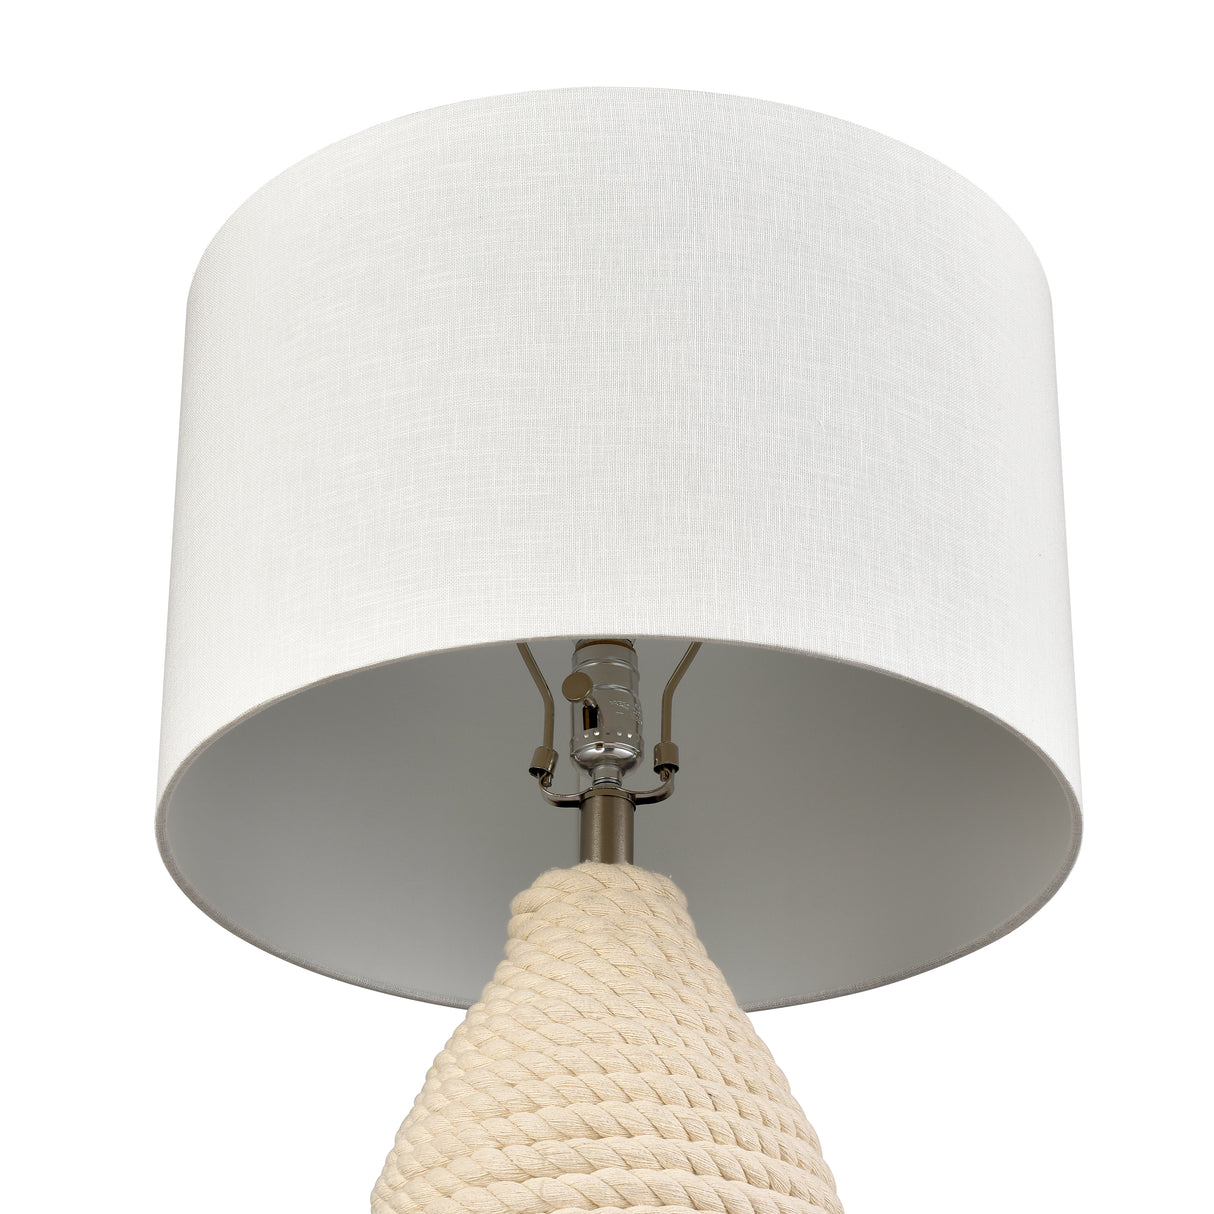 Elk S0019-11142 Sidway 29'' High 1-Light Table Lamp - Off White